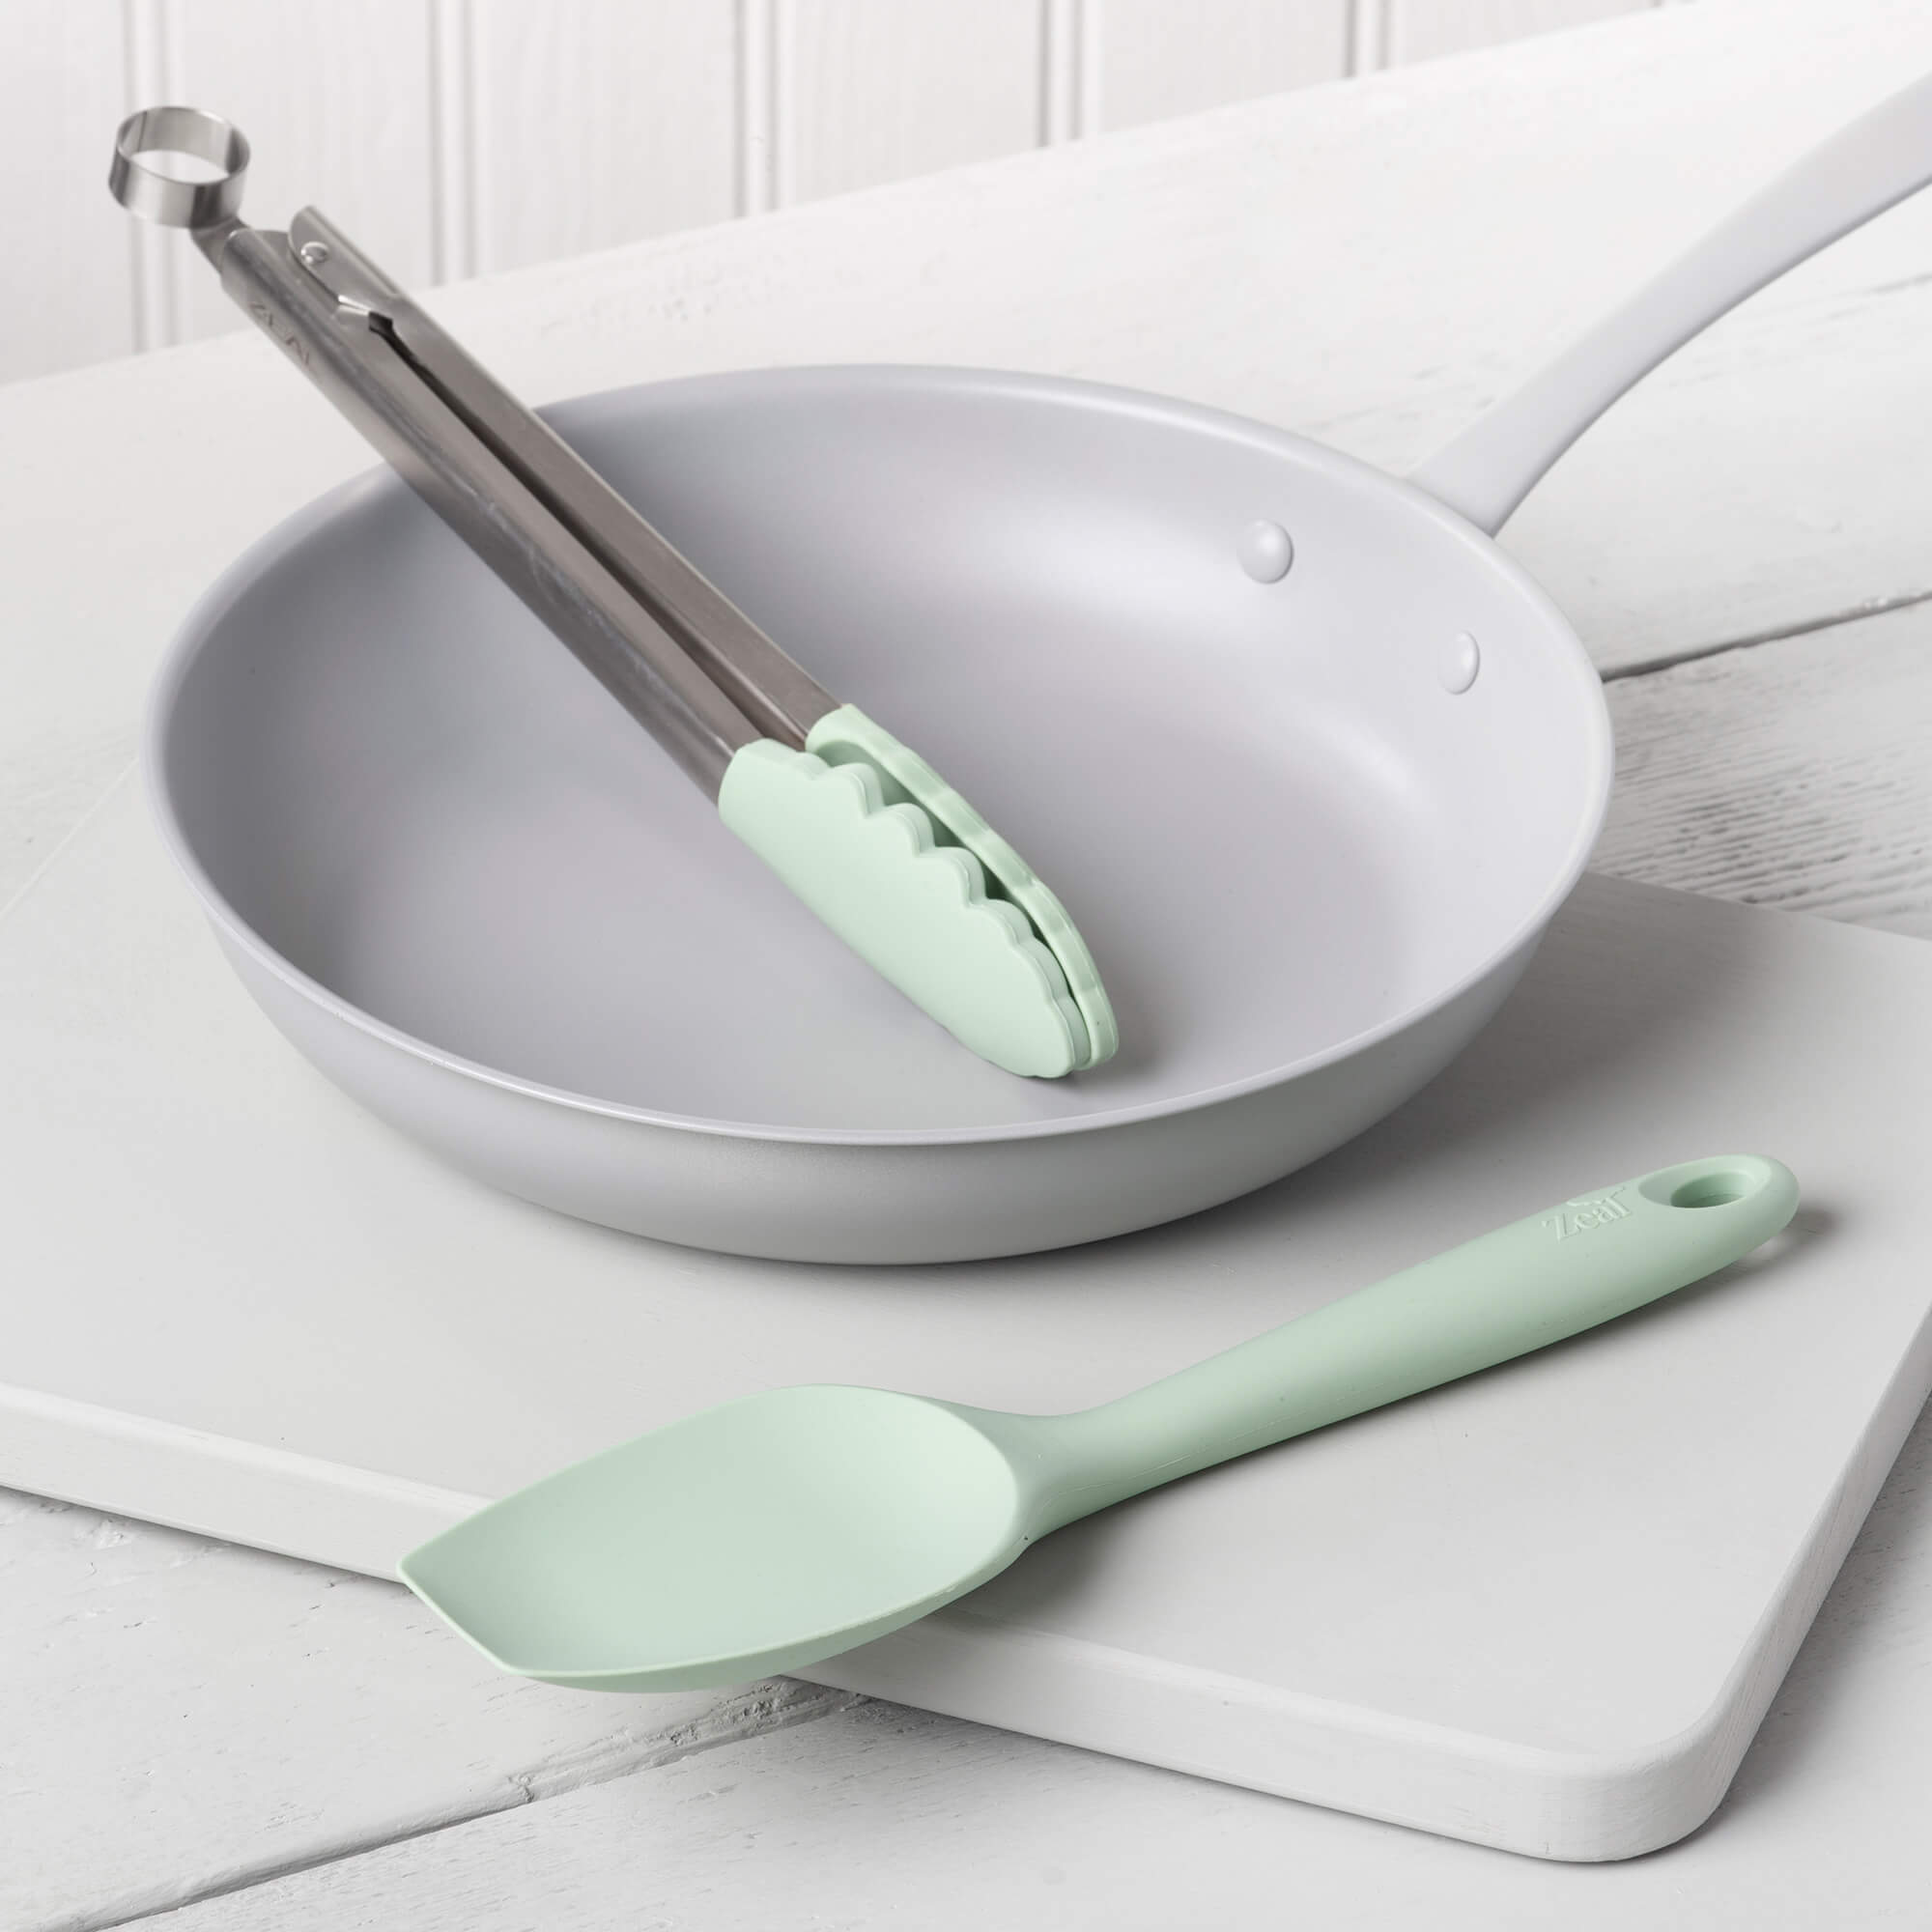 Zeal Silicone Kitchen Tongs & Spatula Spoon Set in Sage Green